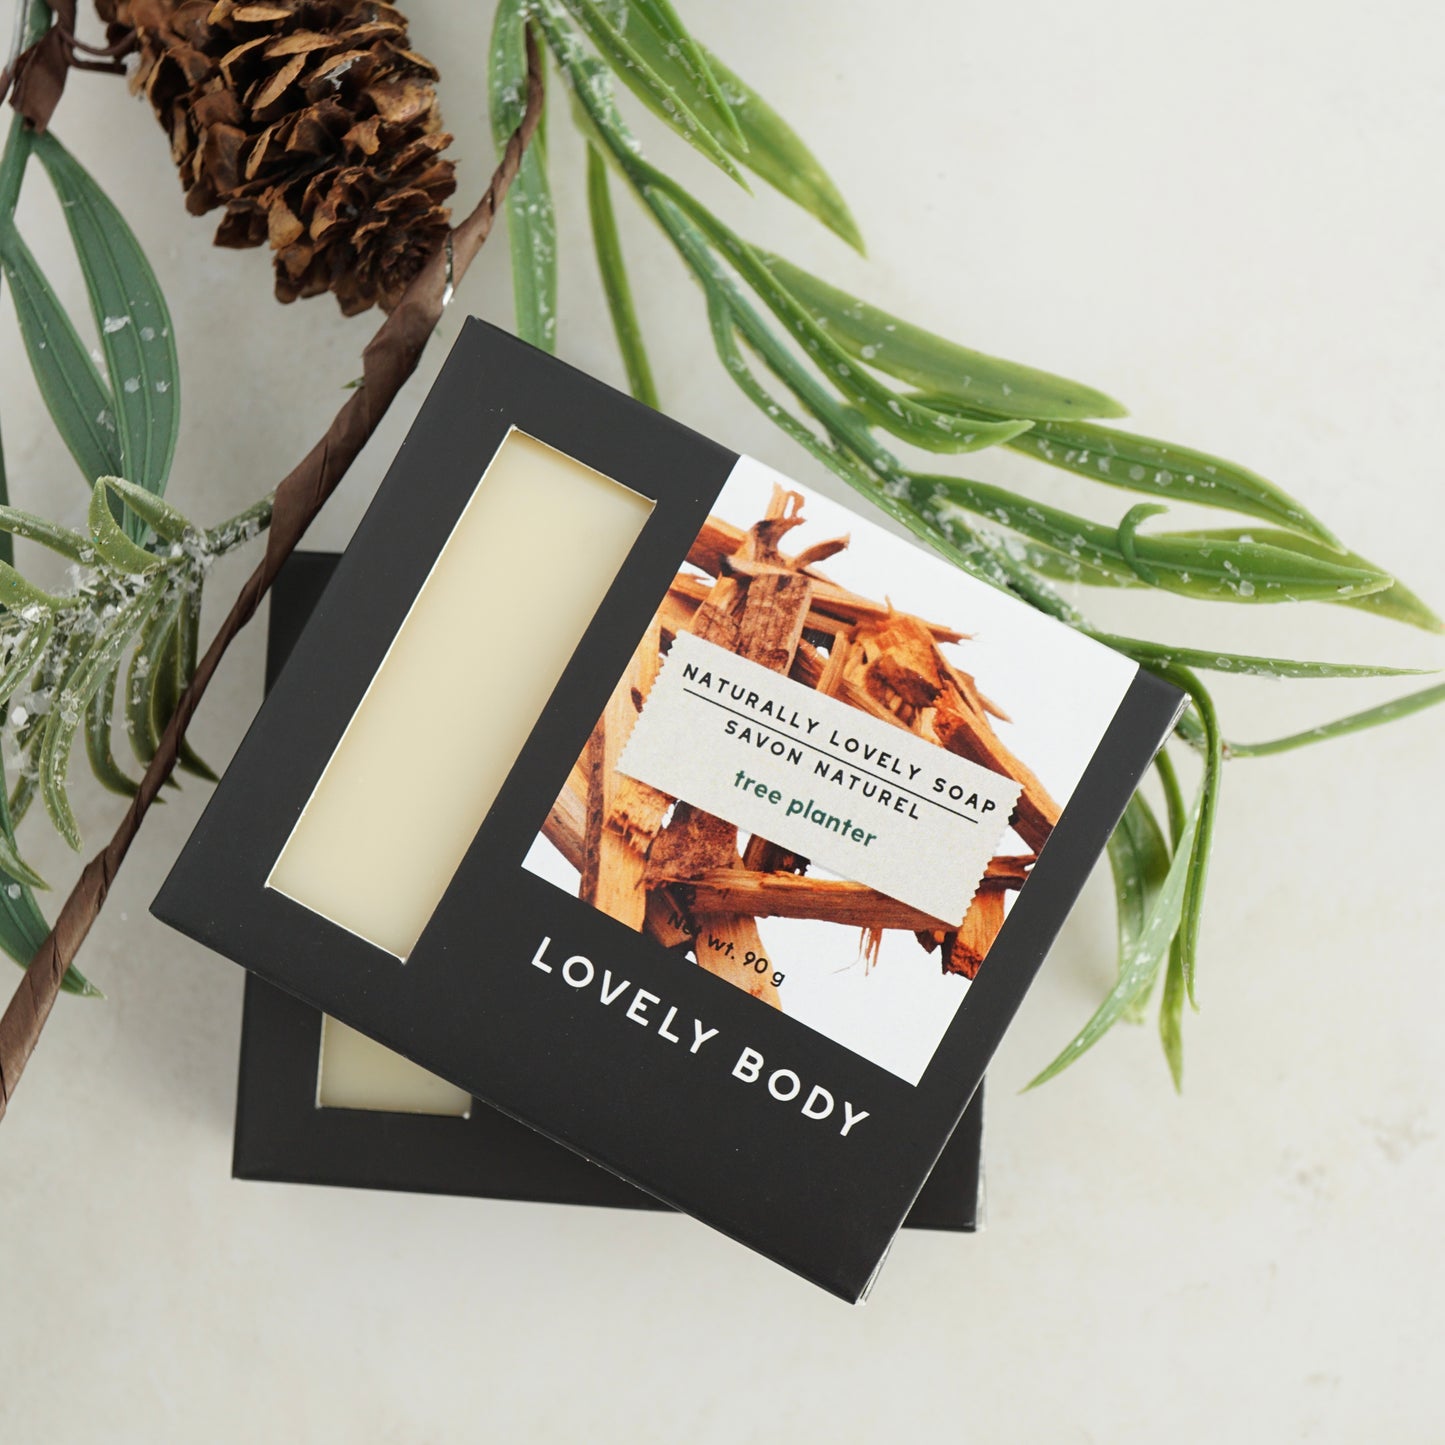 Tree Planter Naturally Lovely Cold Process Soap